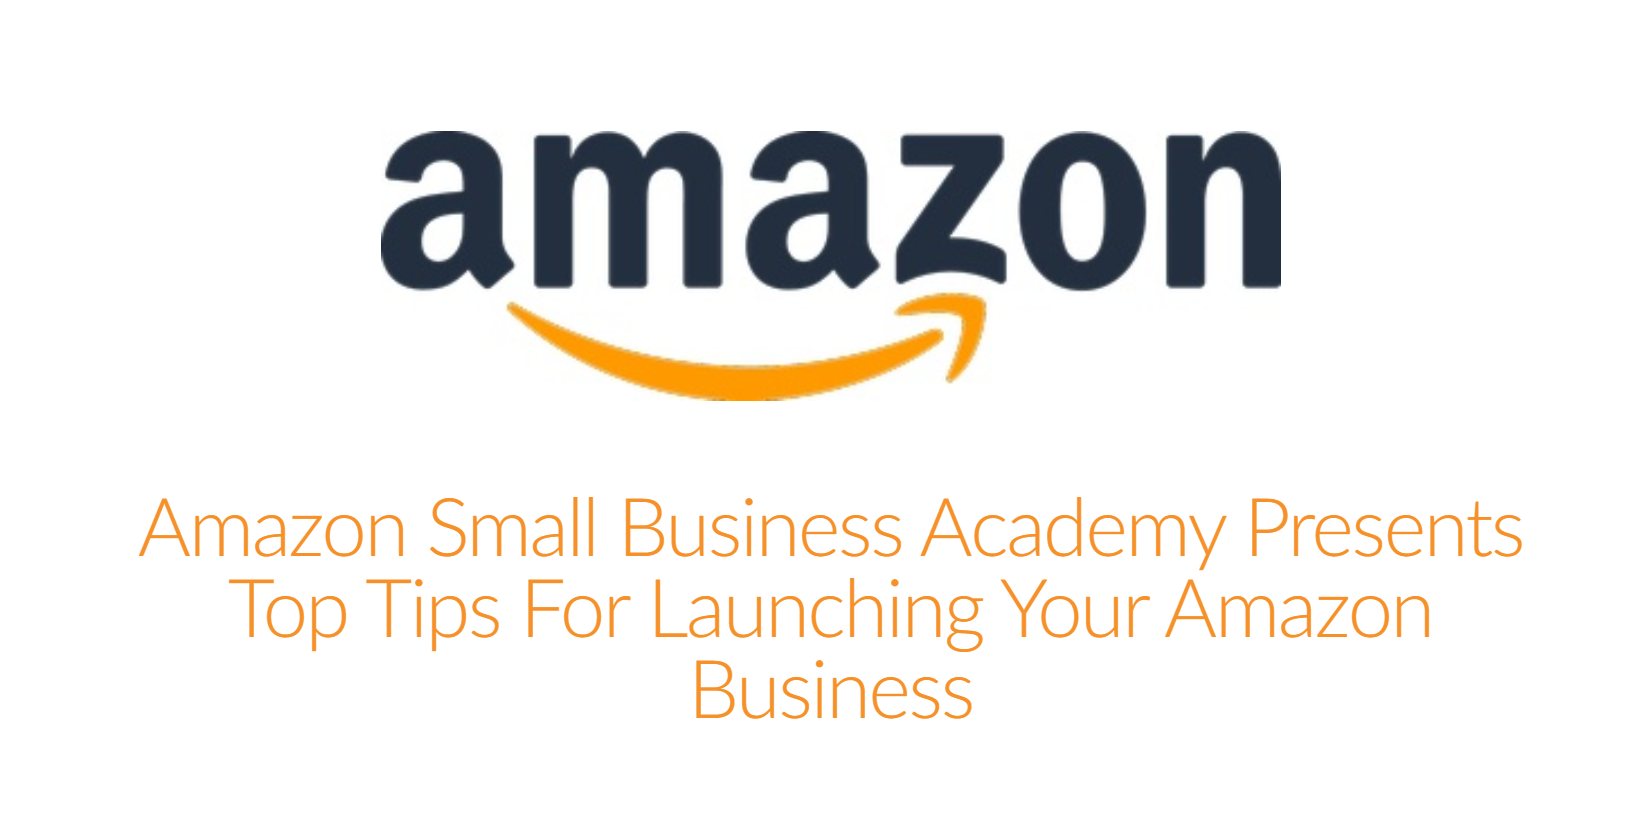 Webinar Amazon Small Business Academy Presents Top Tips for Launching